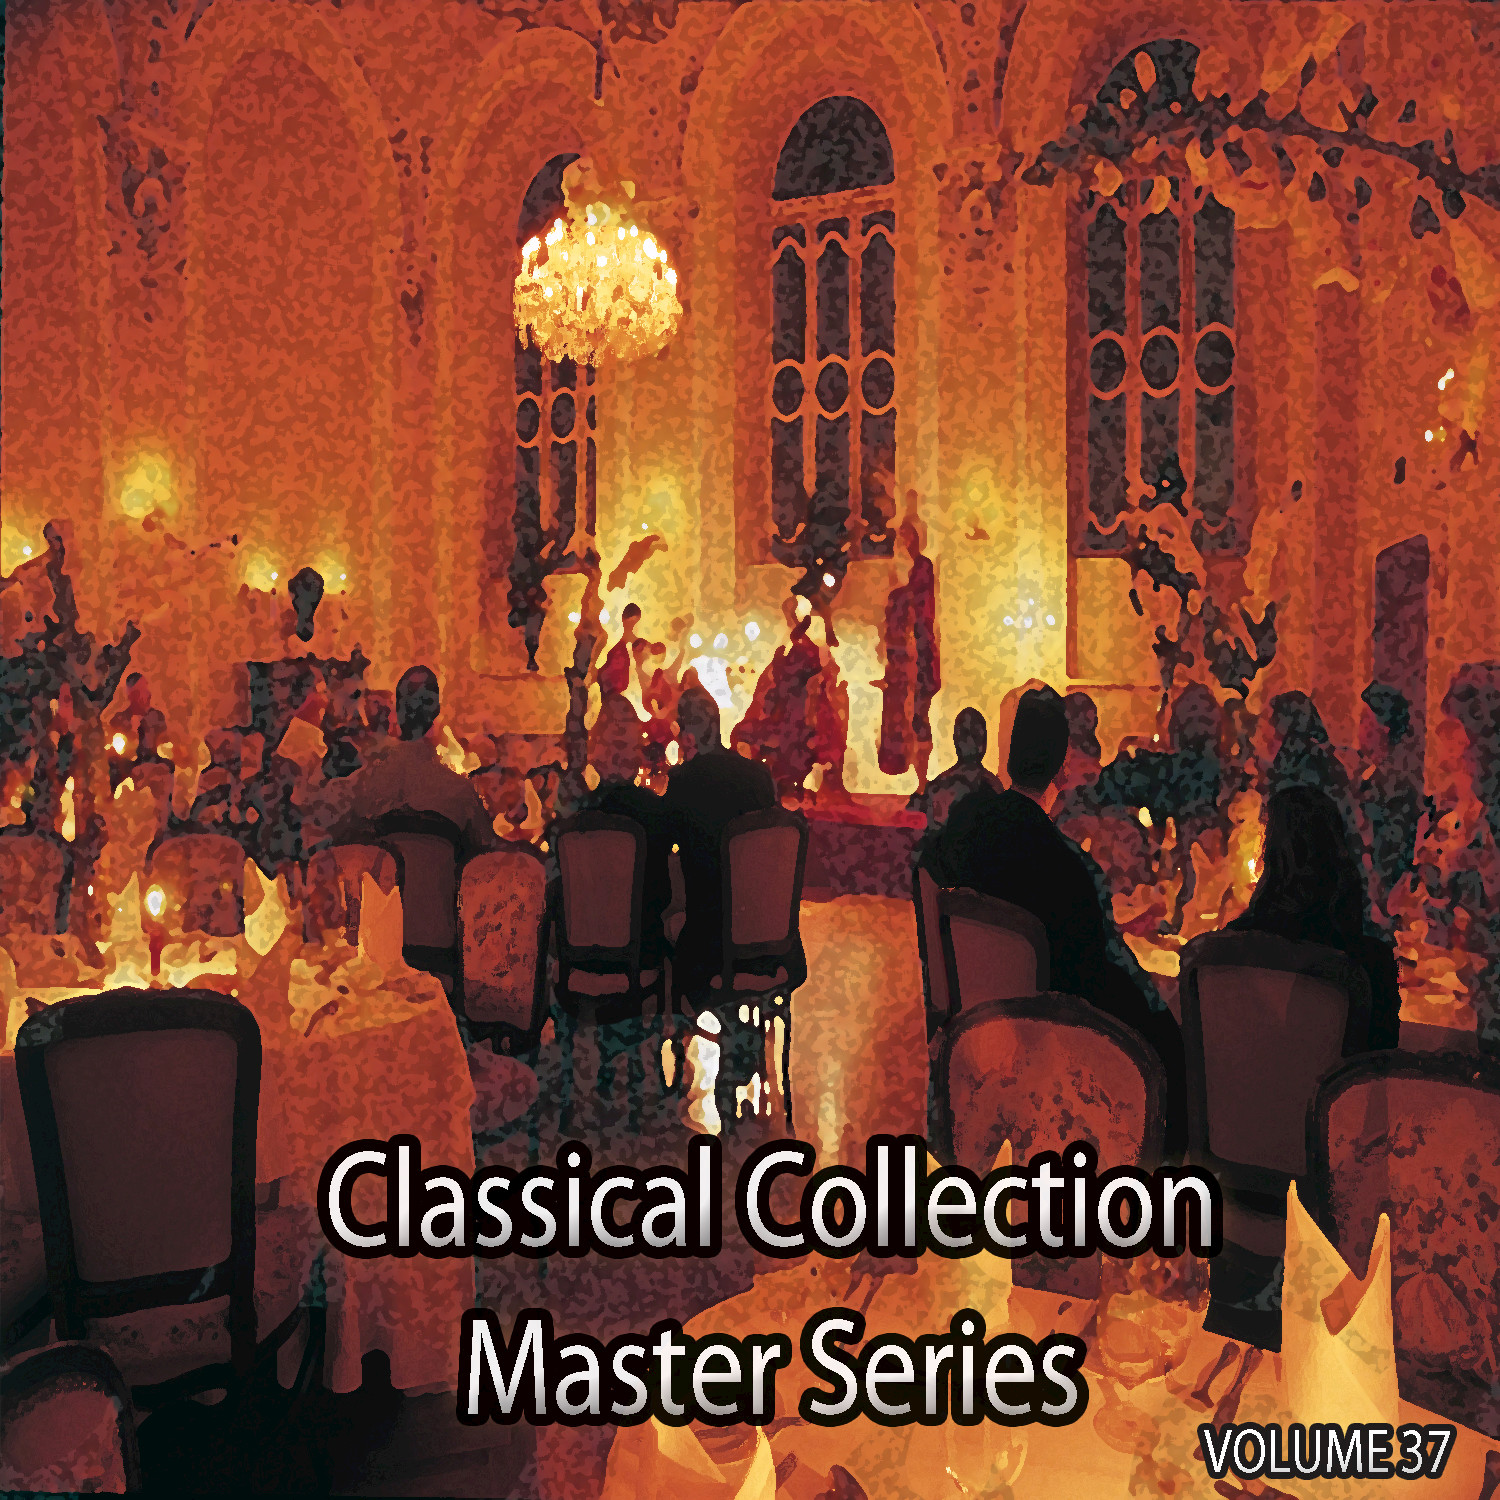 Variations on a Rococo Theme in A for Cello and Orchestra, Op. 33: Pt. 2